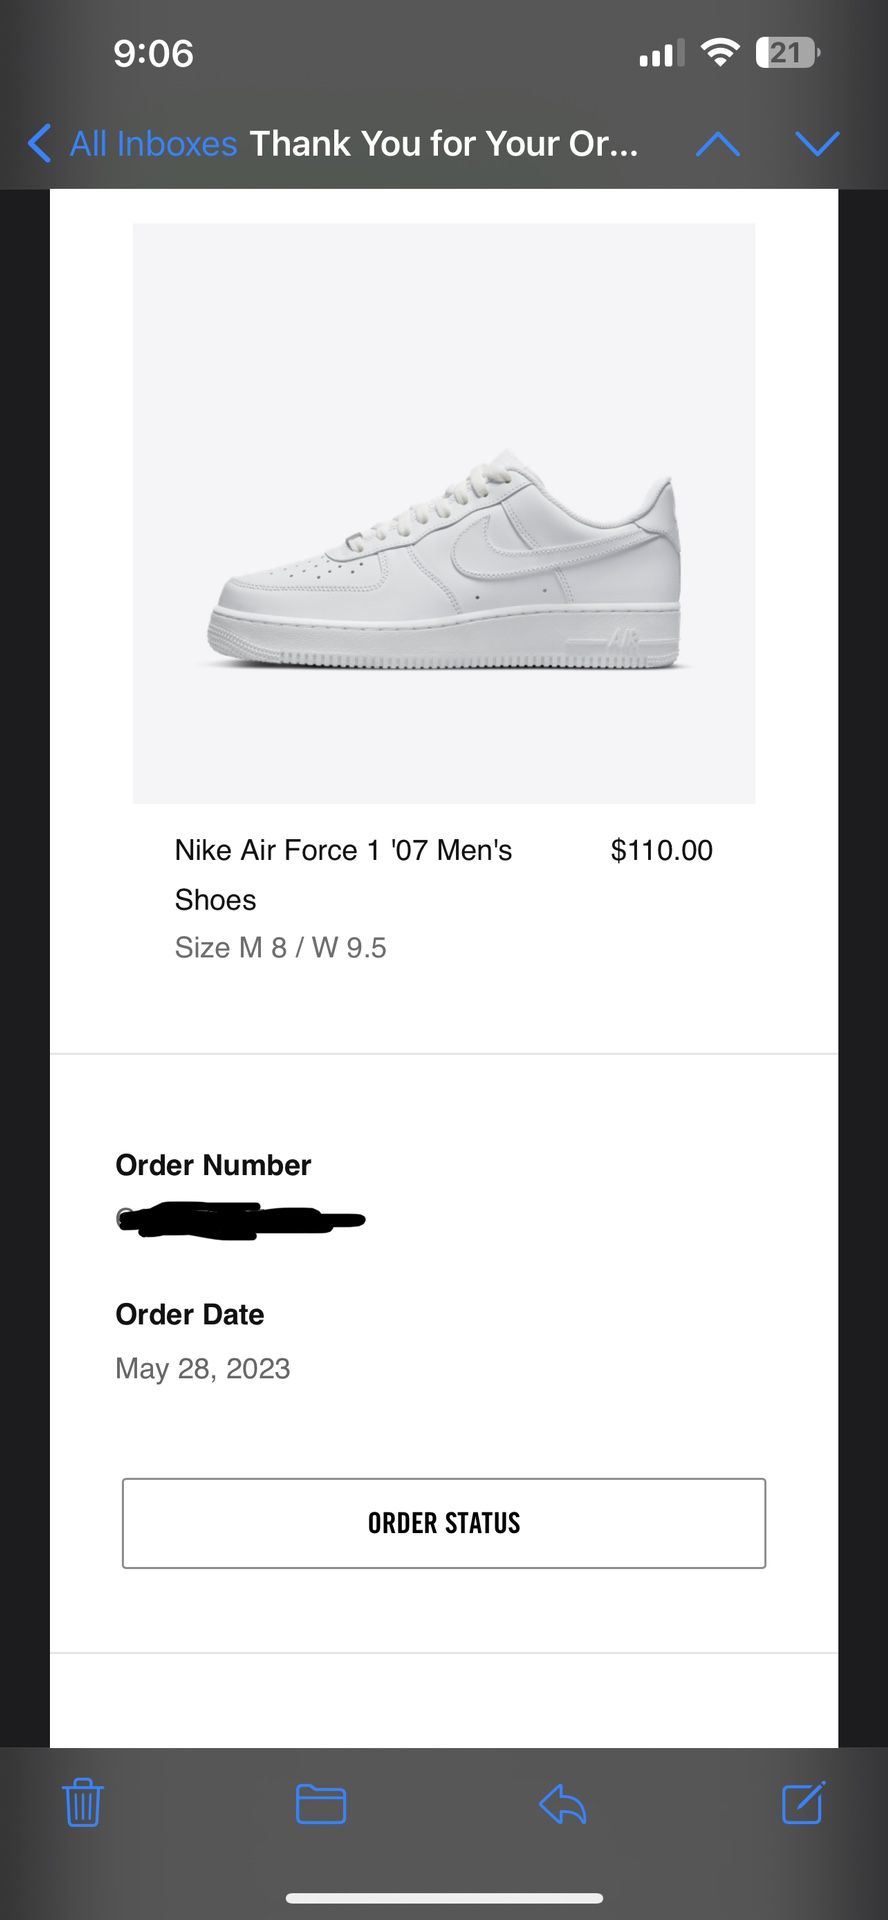 Nike Air Force 1 '07 LV8 Utility Size 10 for Sale in Colma, CA - OfferUp